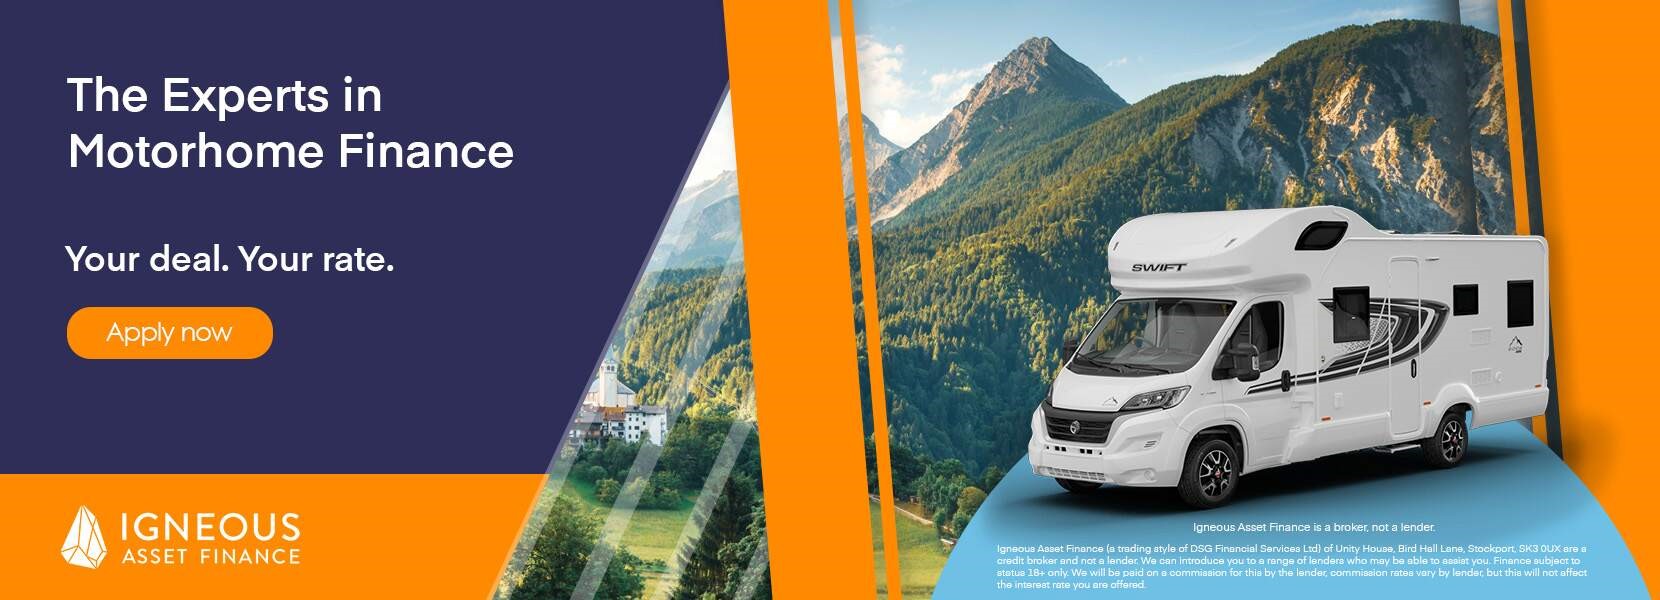 Igneous Asset Finance - The Experts in Motorhome Finance